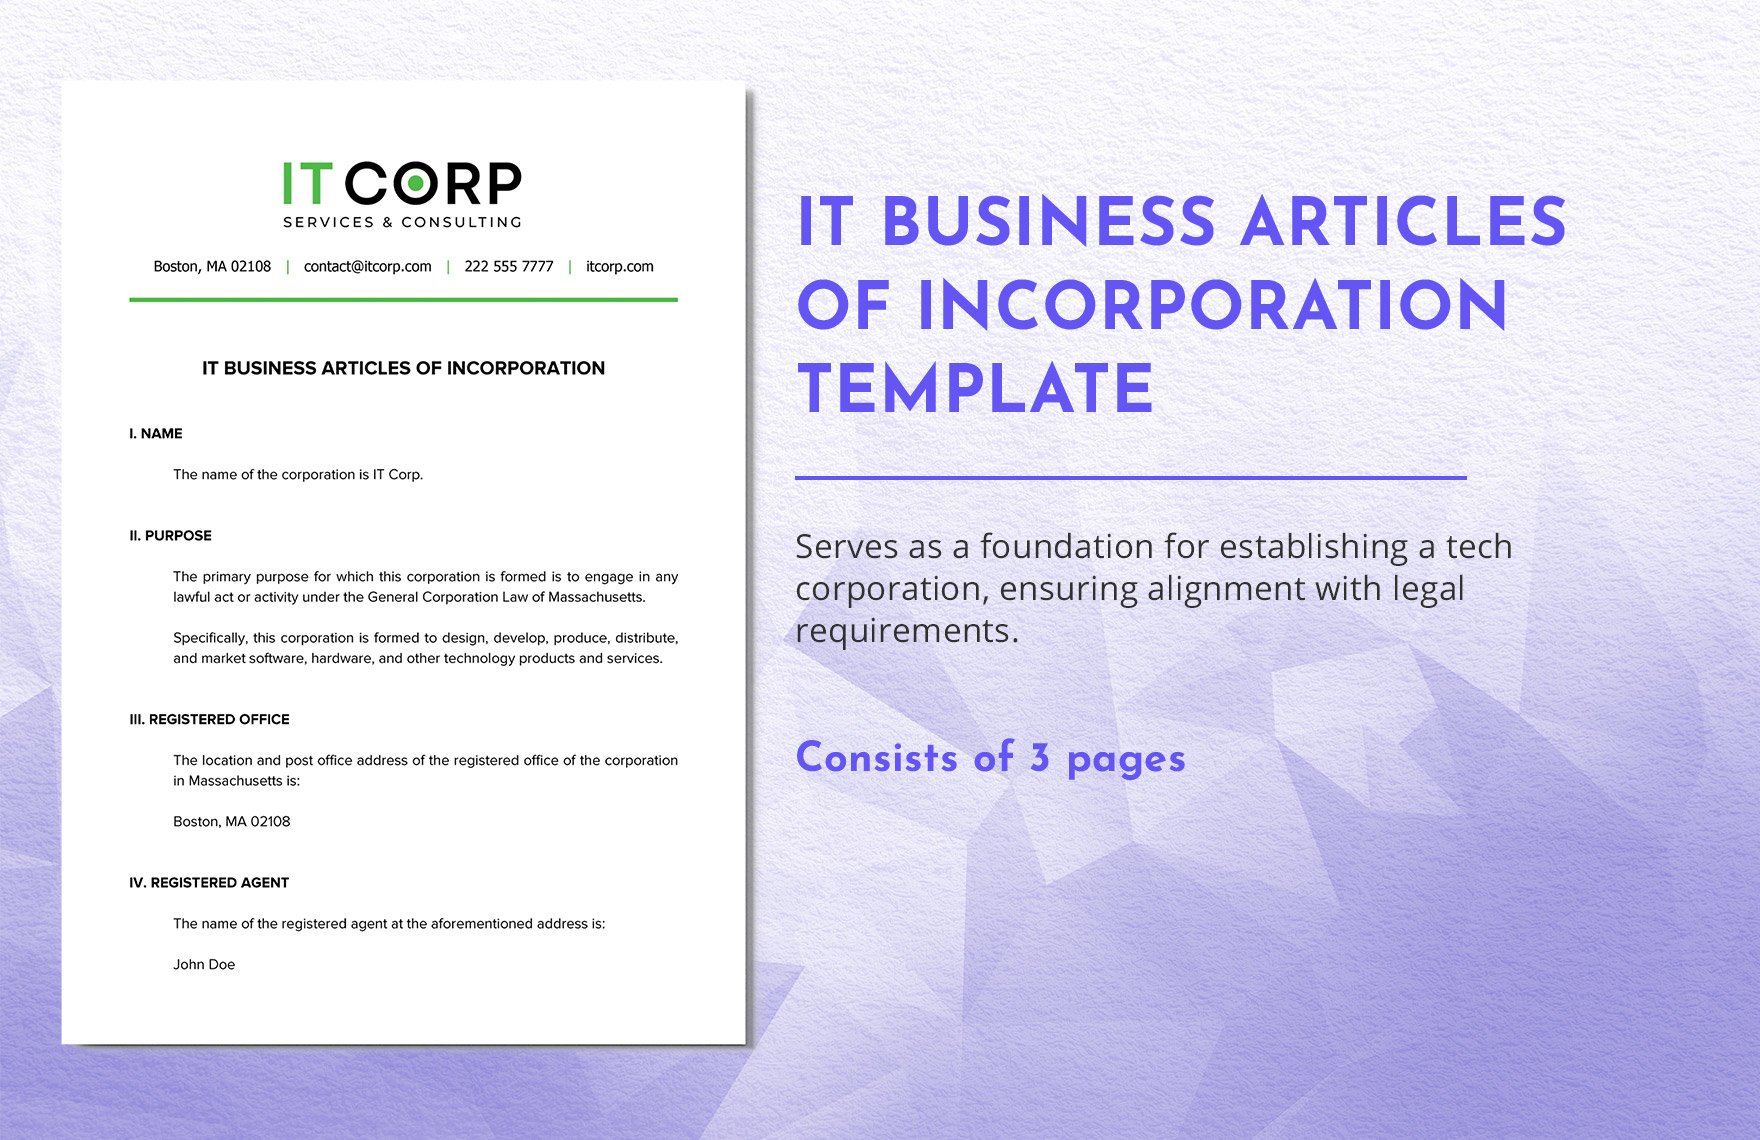 IT Business Articles of Incorporation Template in Word, Google Docs, PDF